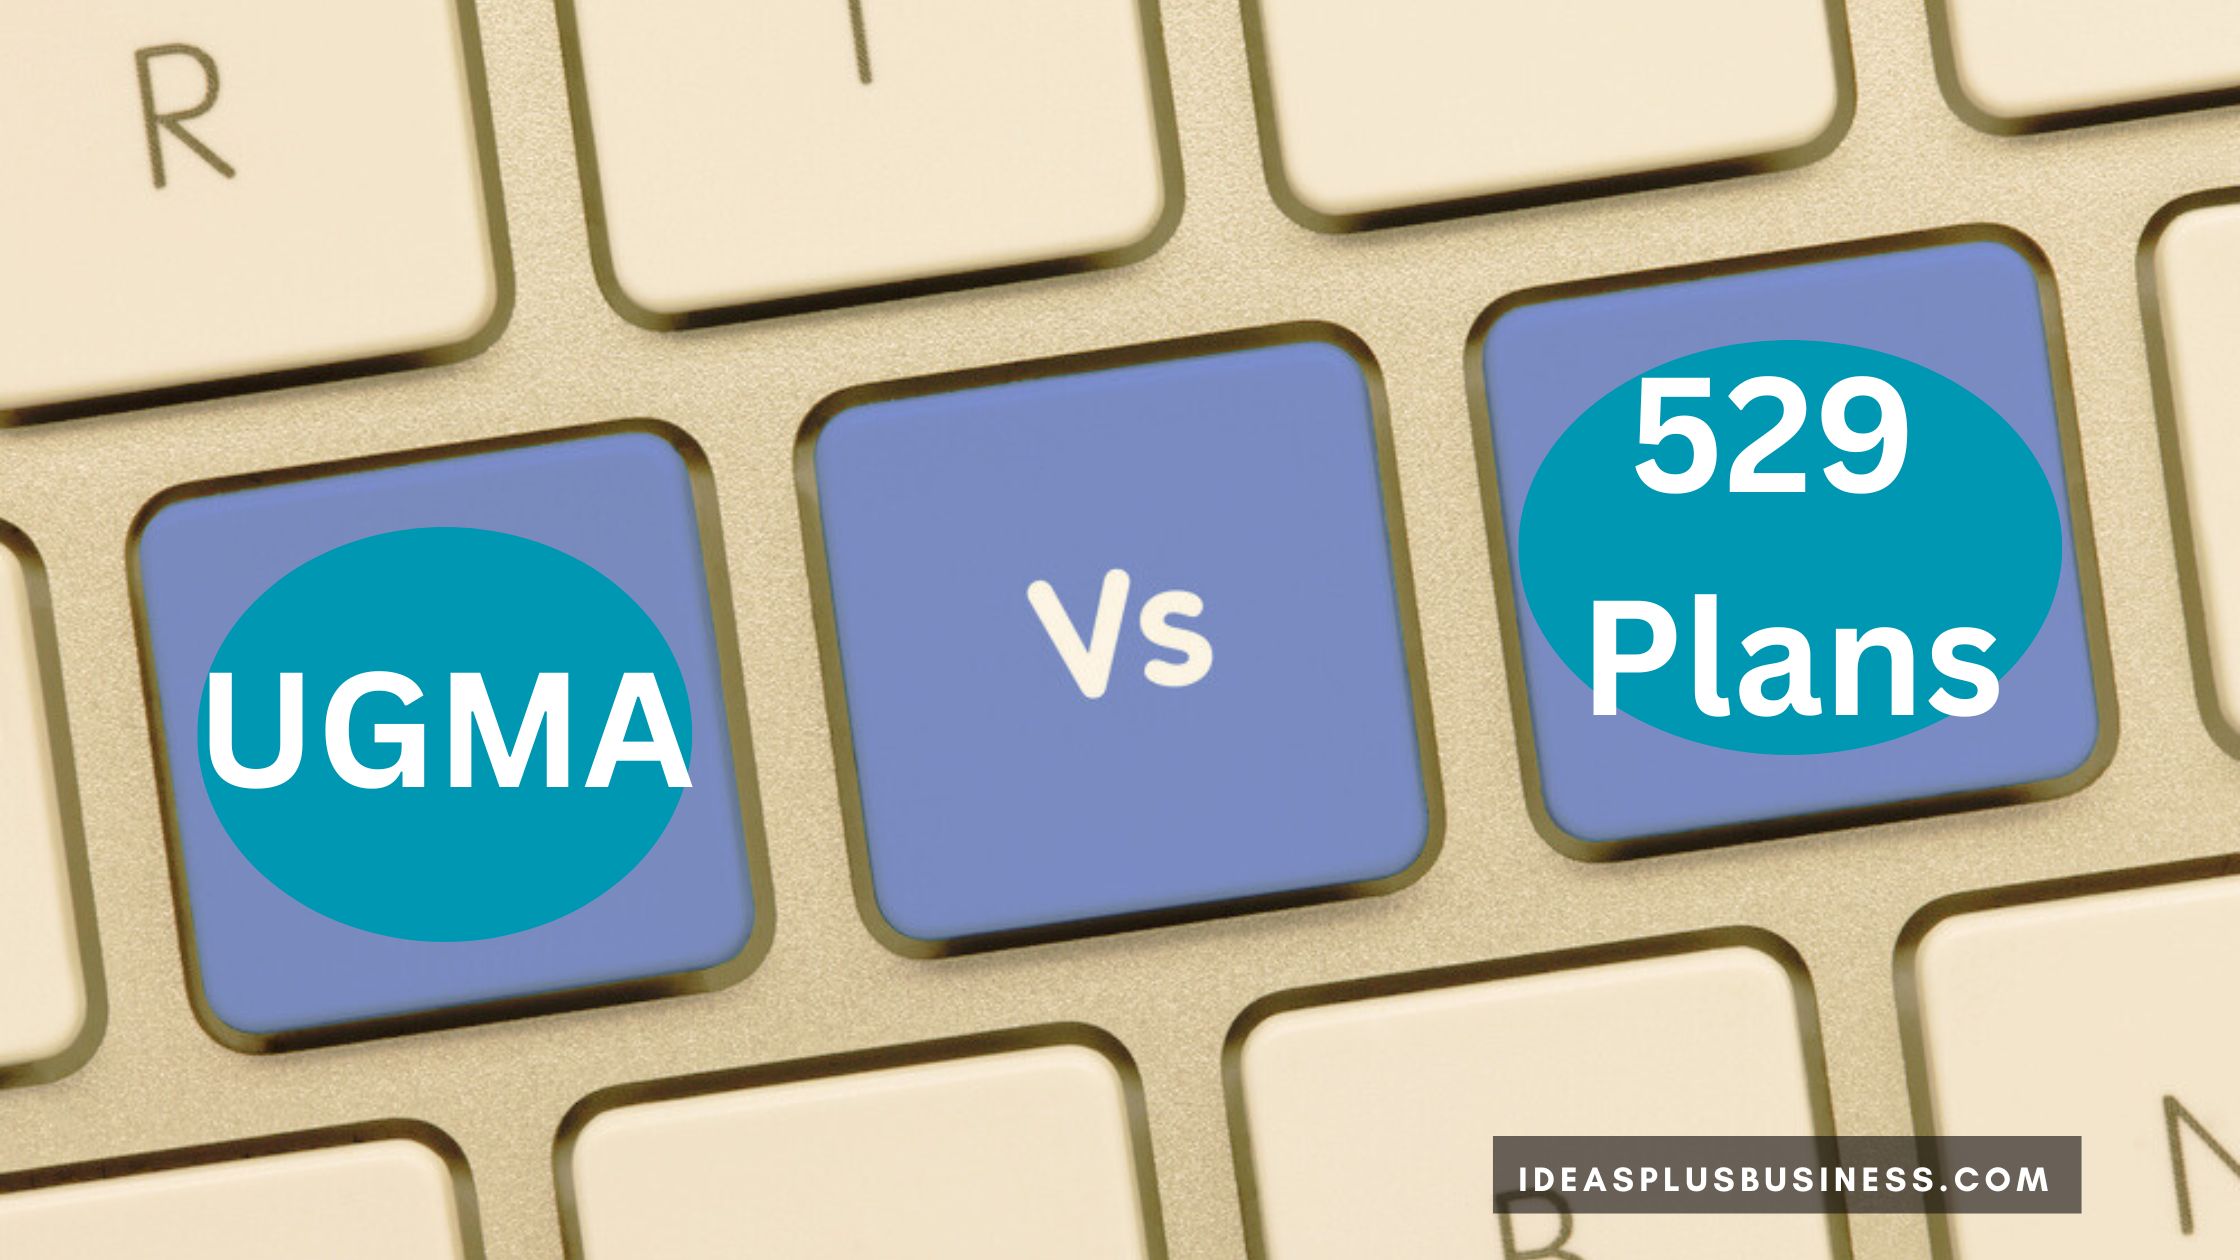 UGMA vs 529 Plans: Which is better